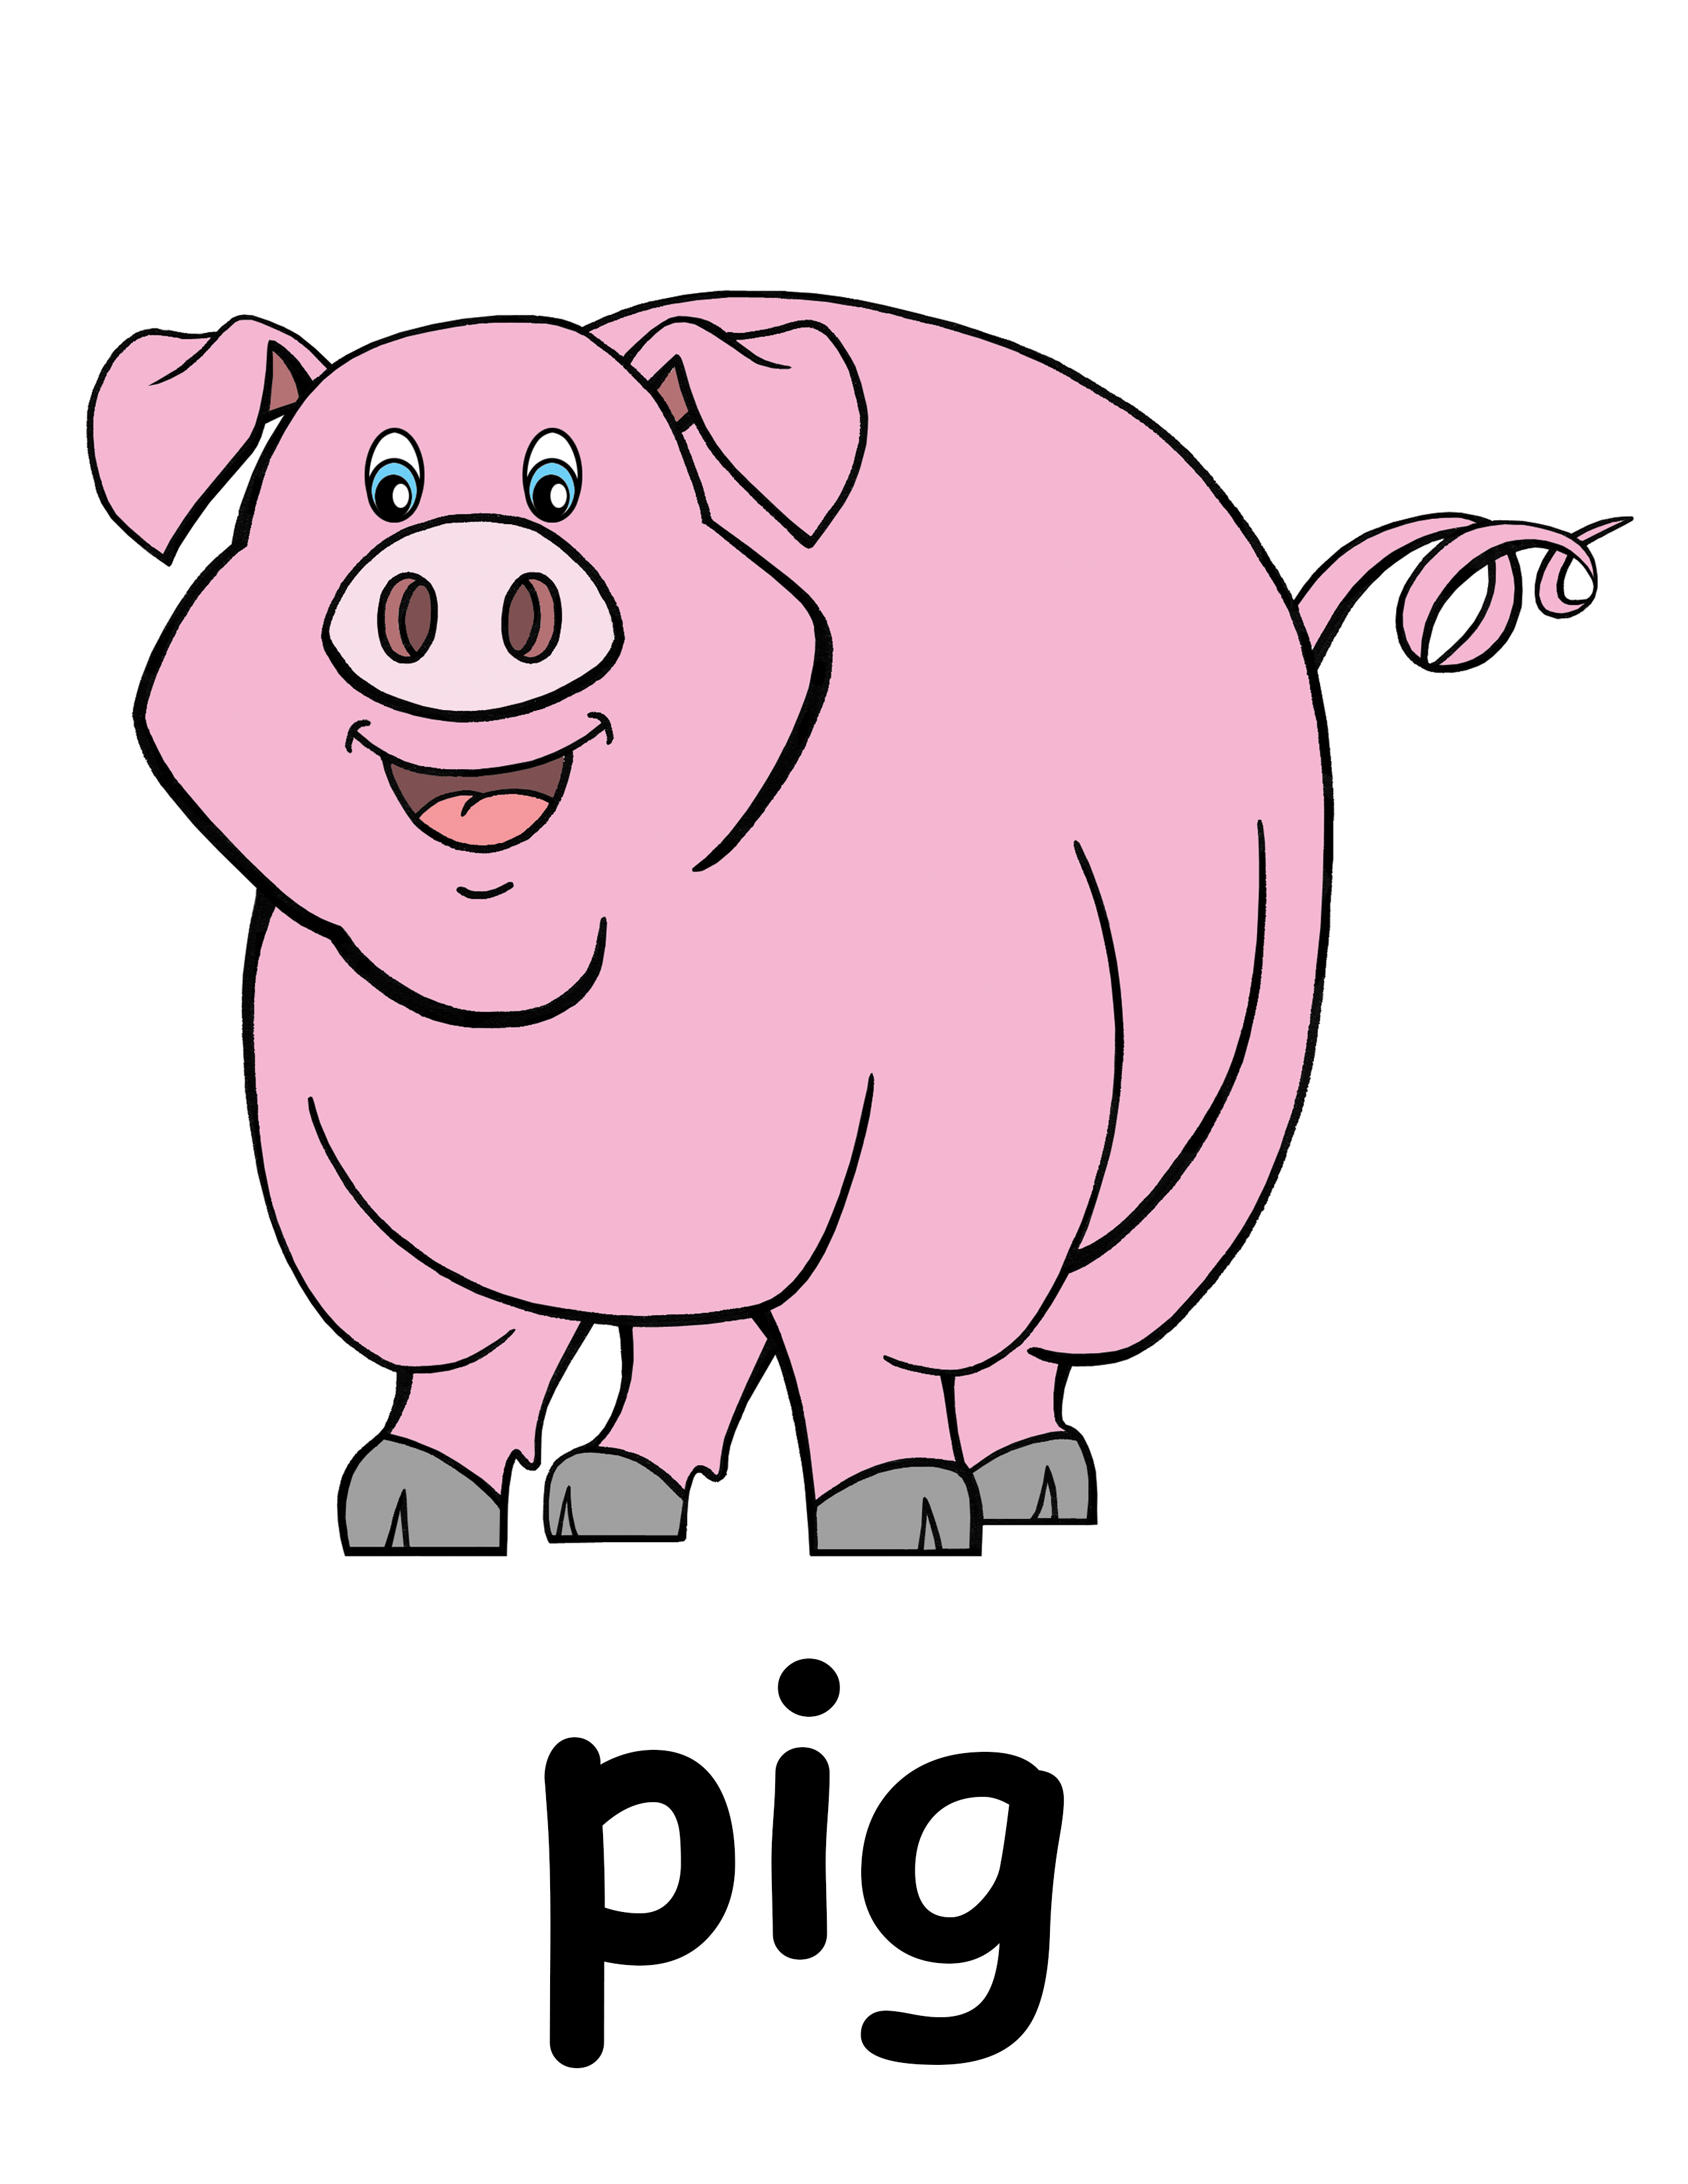 Free black and white pig clip art clipart clipartcow